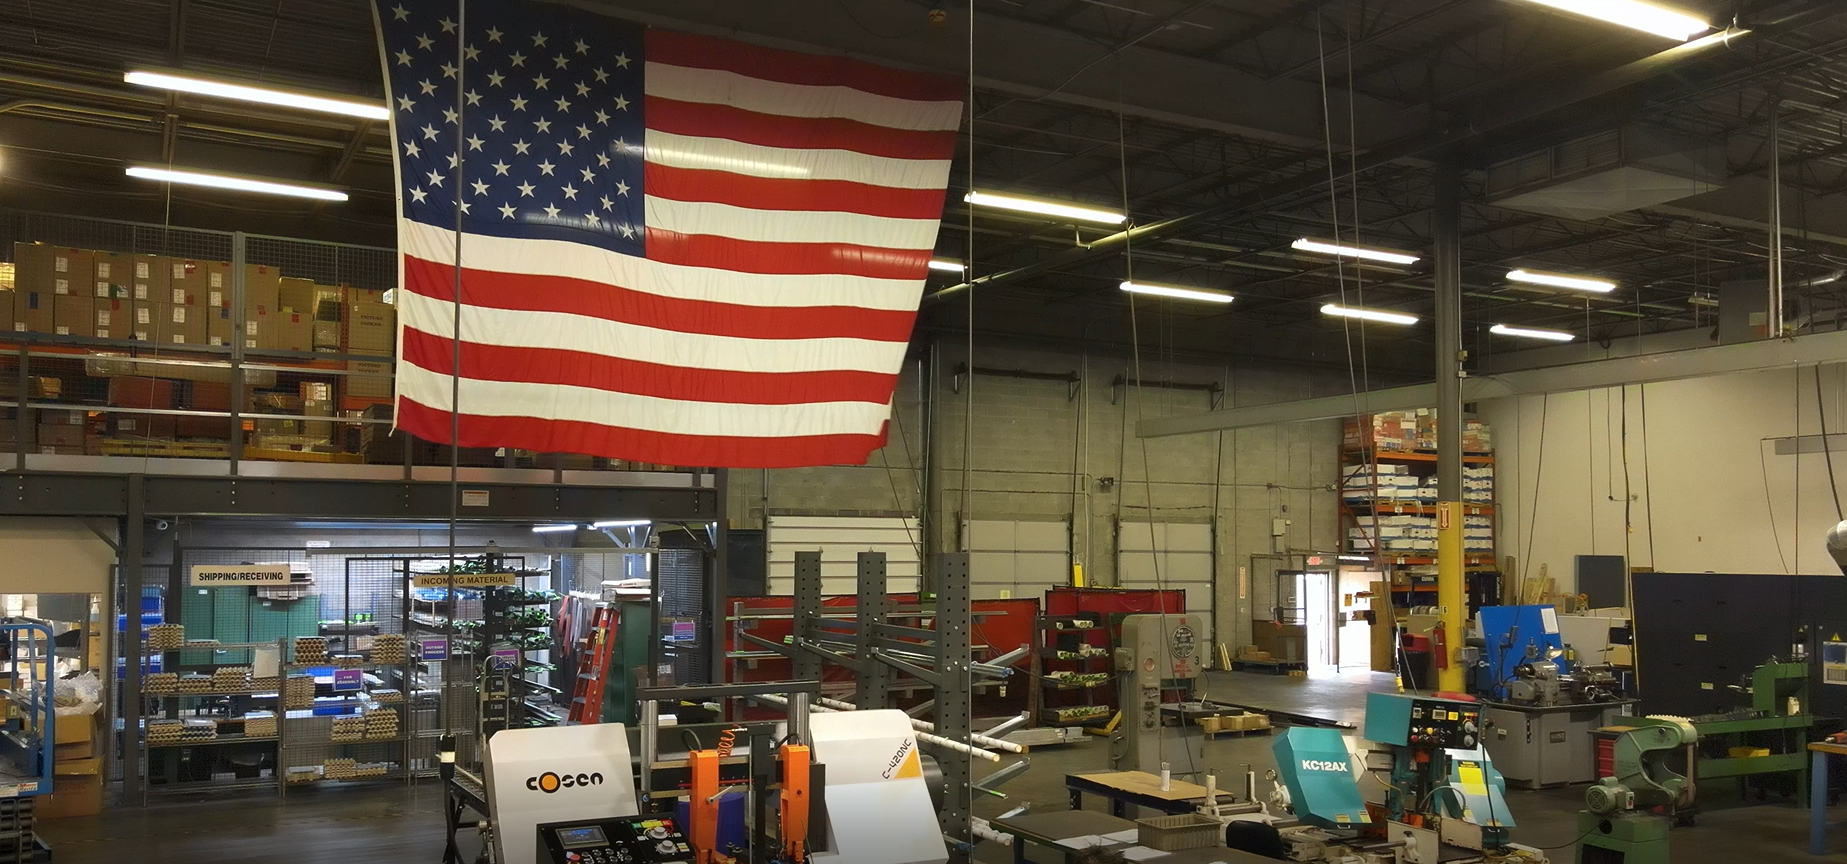 machine shop with American flag hanging